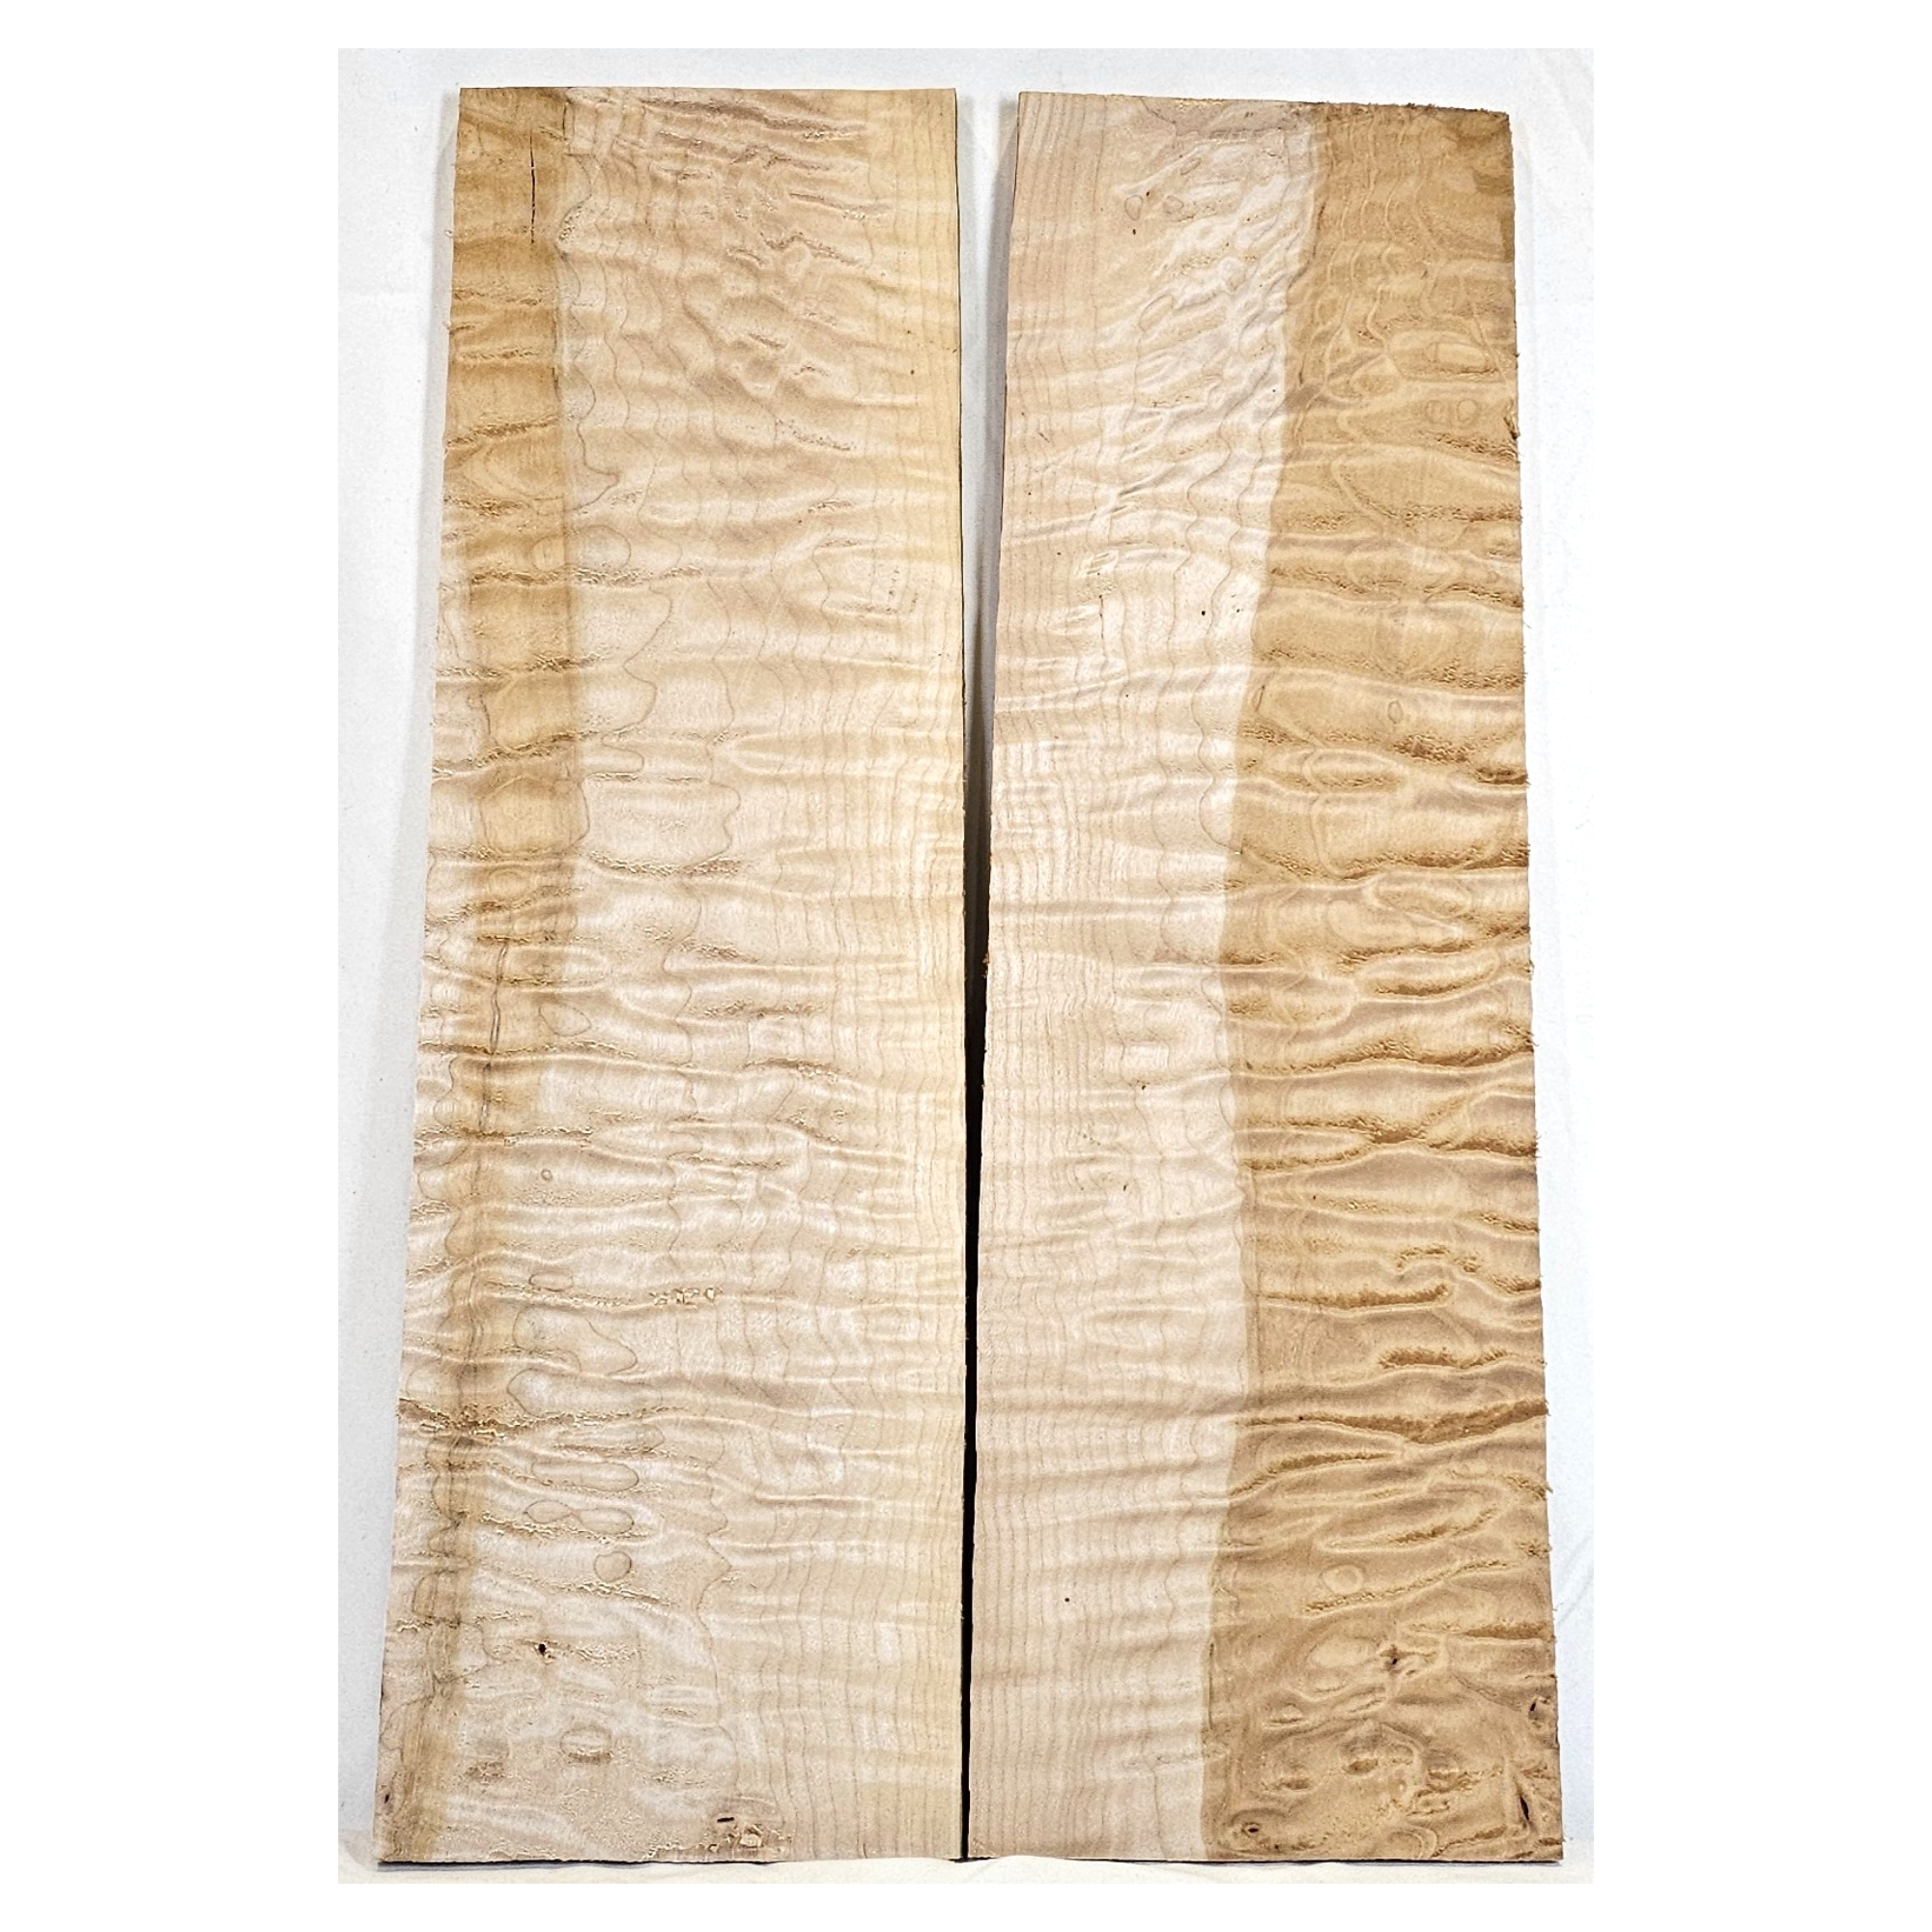 Stunning quilted maple 2-piece set with 5A grade figure and interesting two-tone color